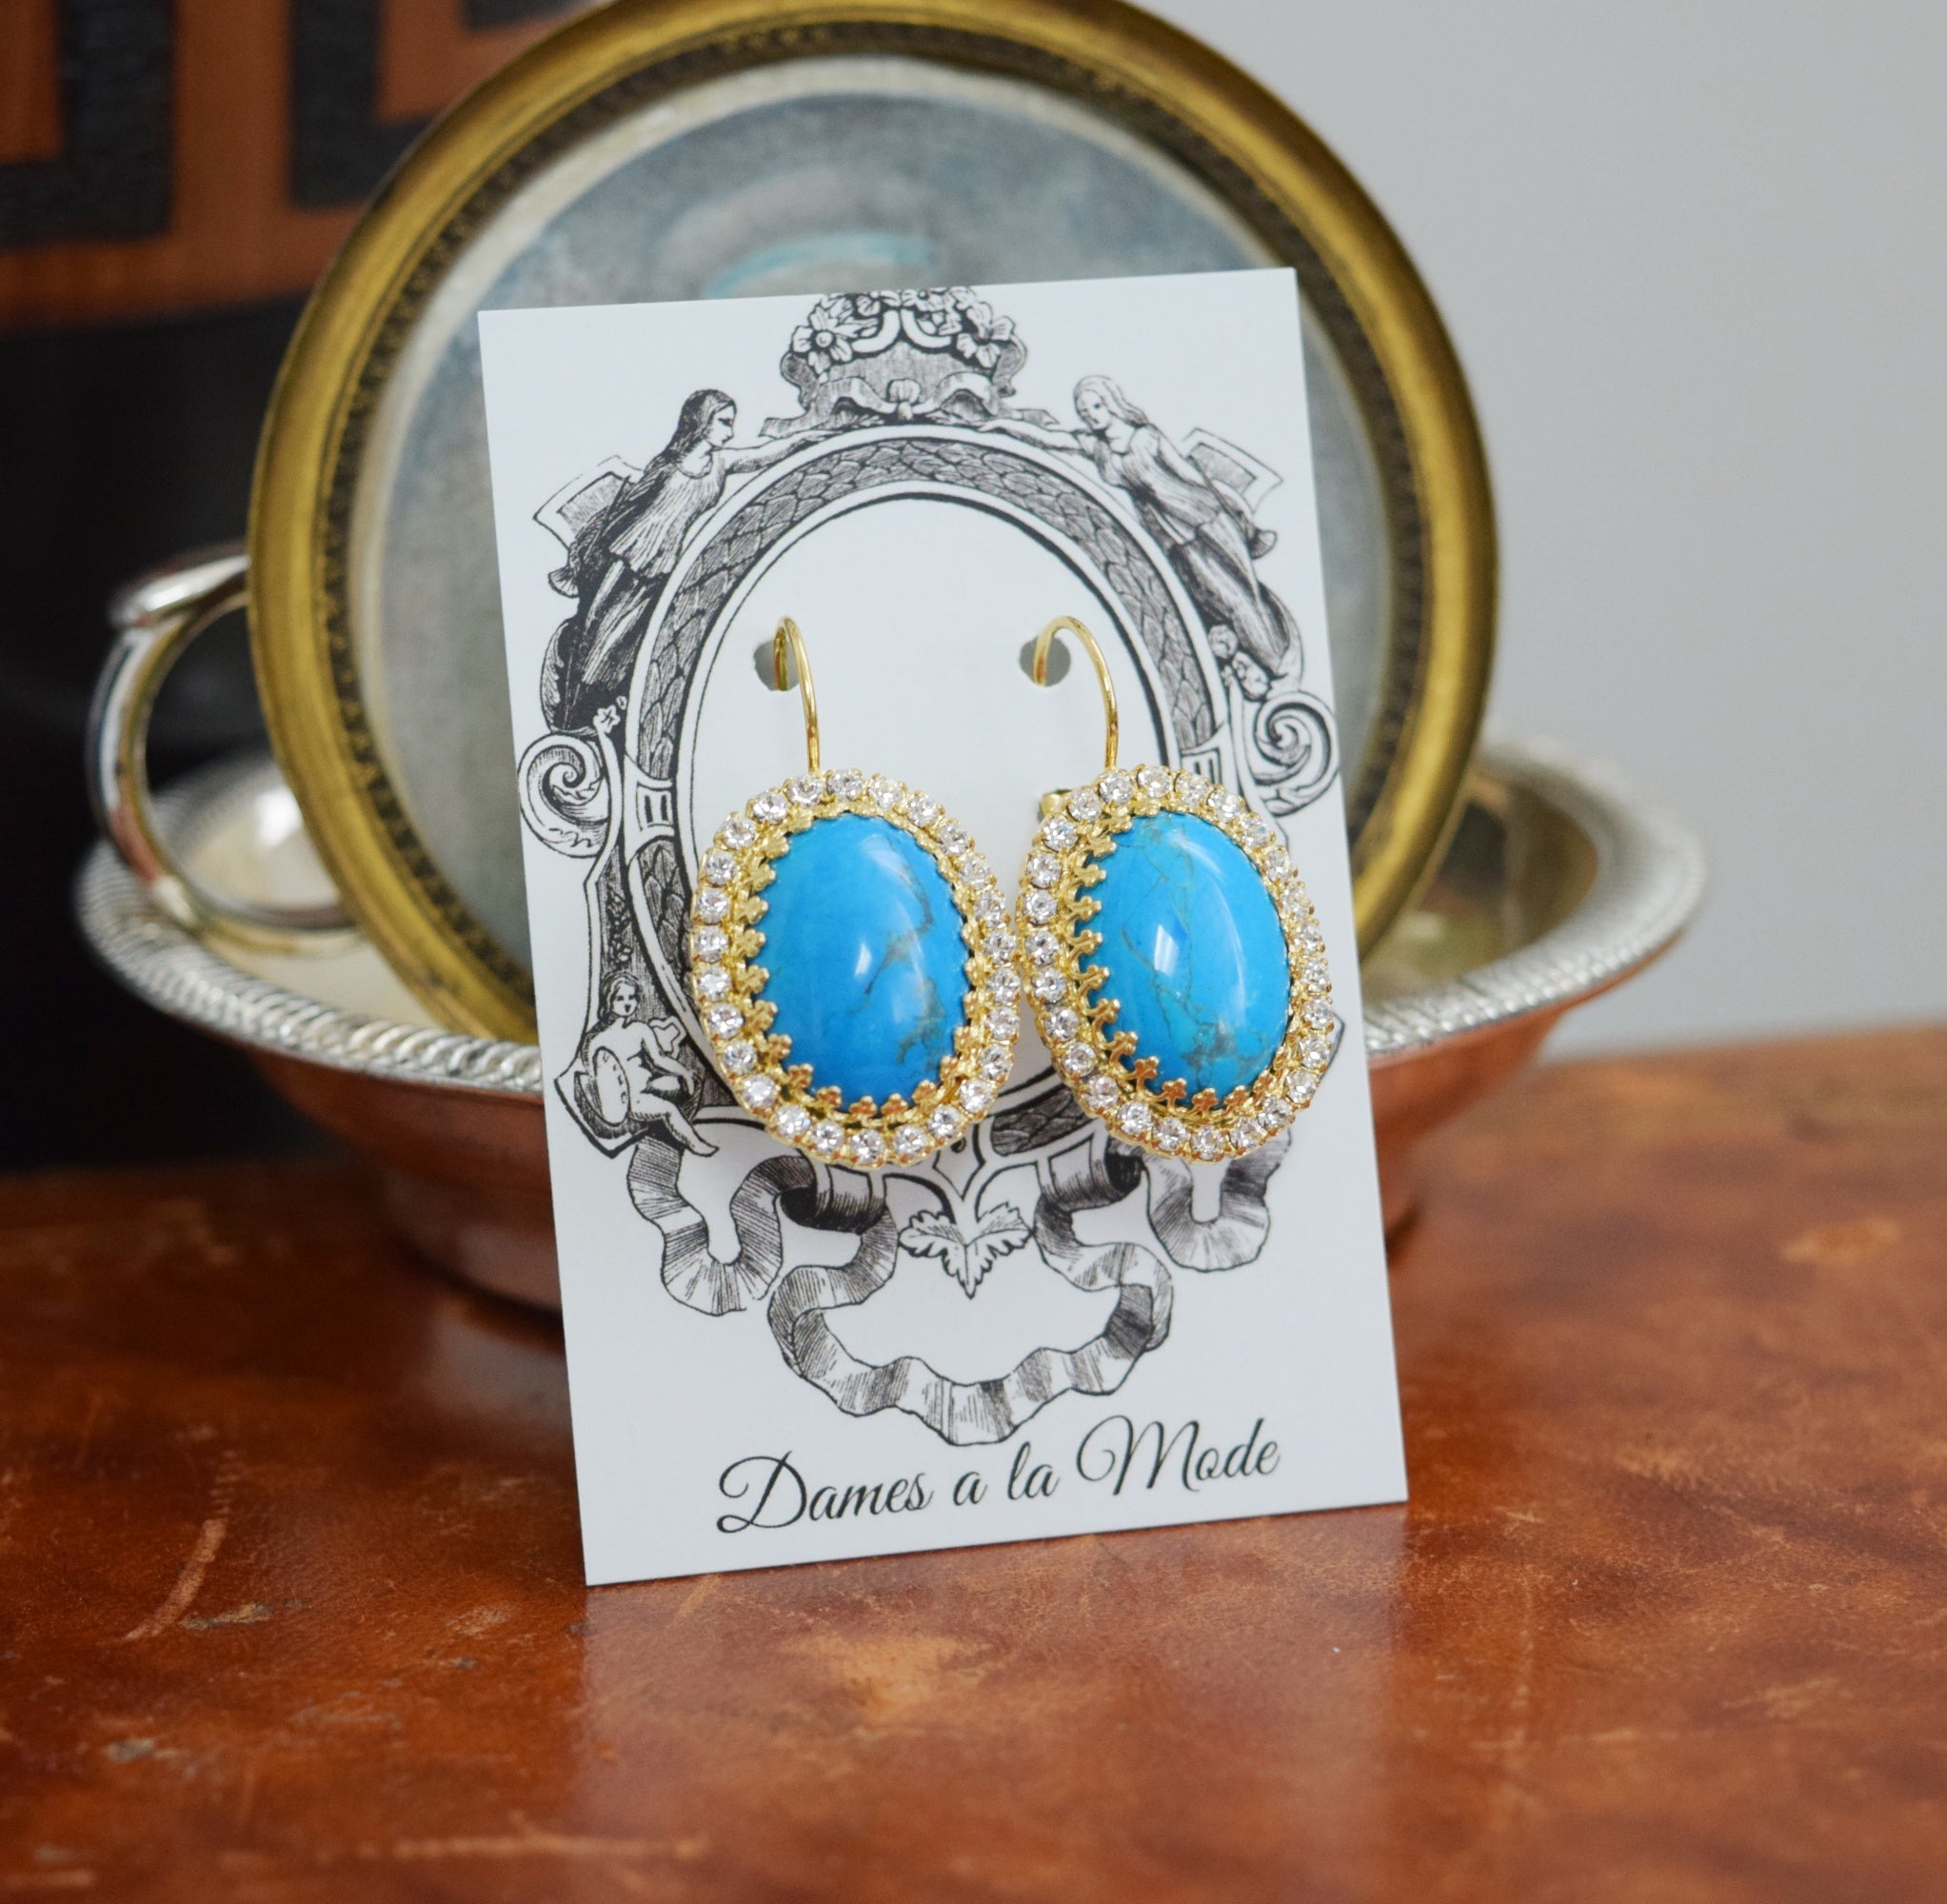 Turquoise earrings - Large 4 turquoise stone and sterling drop earring